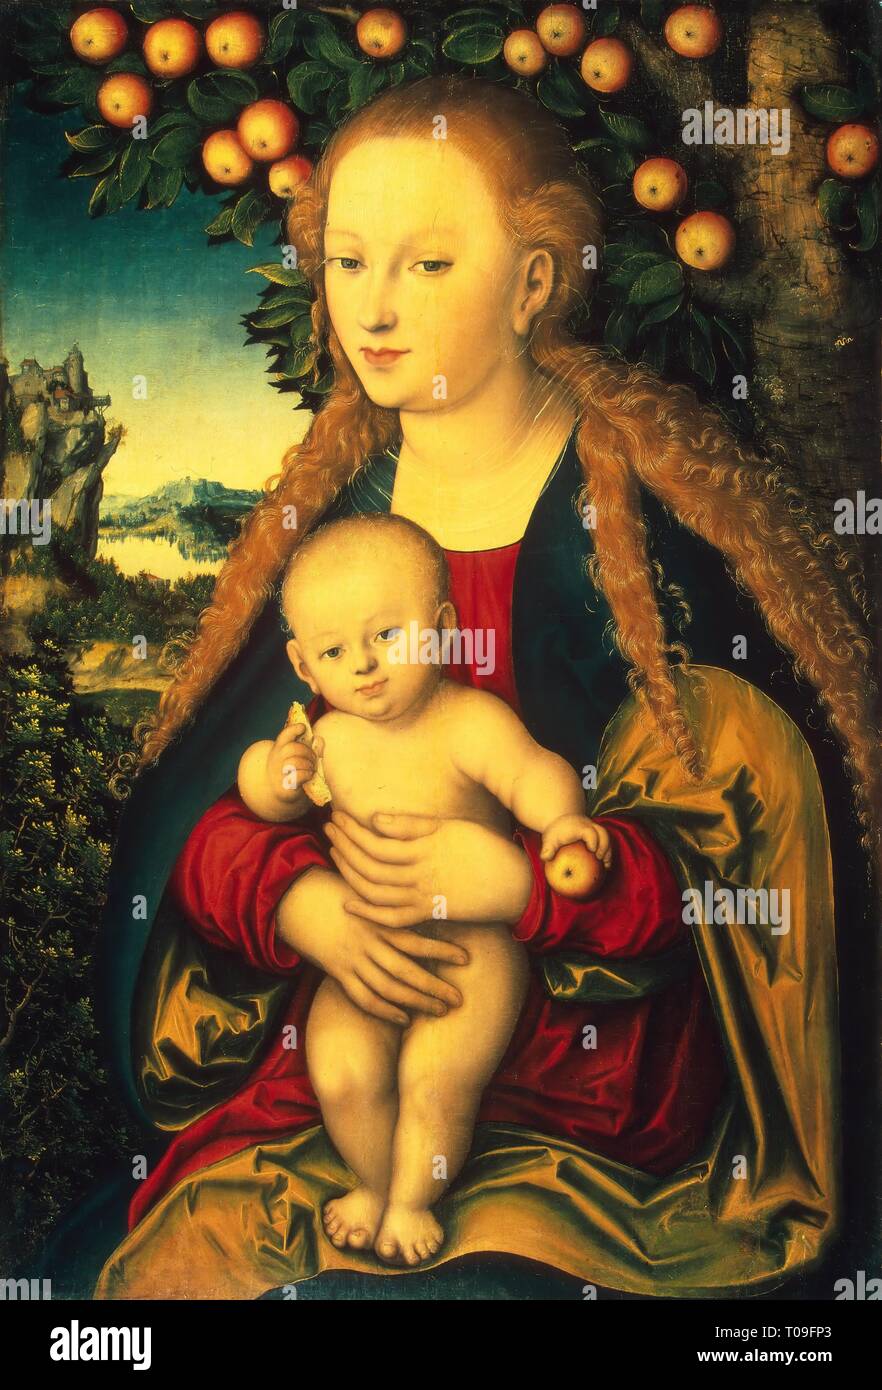 'The Virgin and Child Under an Apple Tree'. Germany, Circa 1530s. Dimensions: 87x59 cm. Museum: State Hermitage, St. Petersburg. Author: Lucas Cranach I. THE ELDER LUCAS CRANACH . Lucas Cranach the Elder . Cranach, Lucas, the Elder. Stock Photo